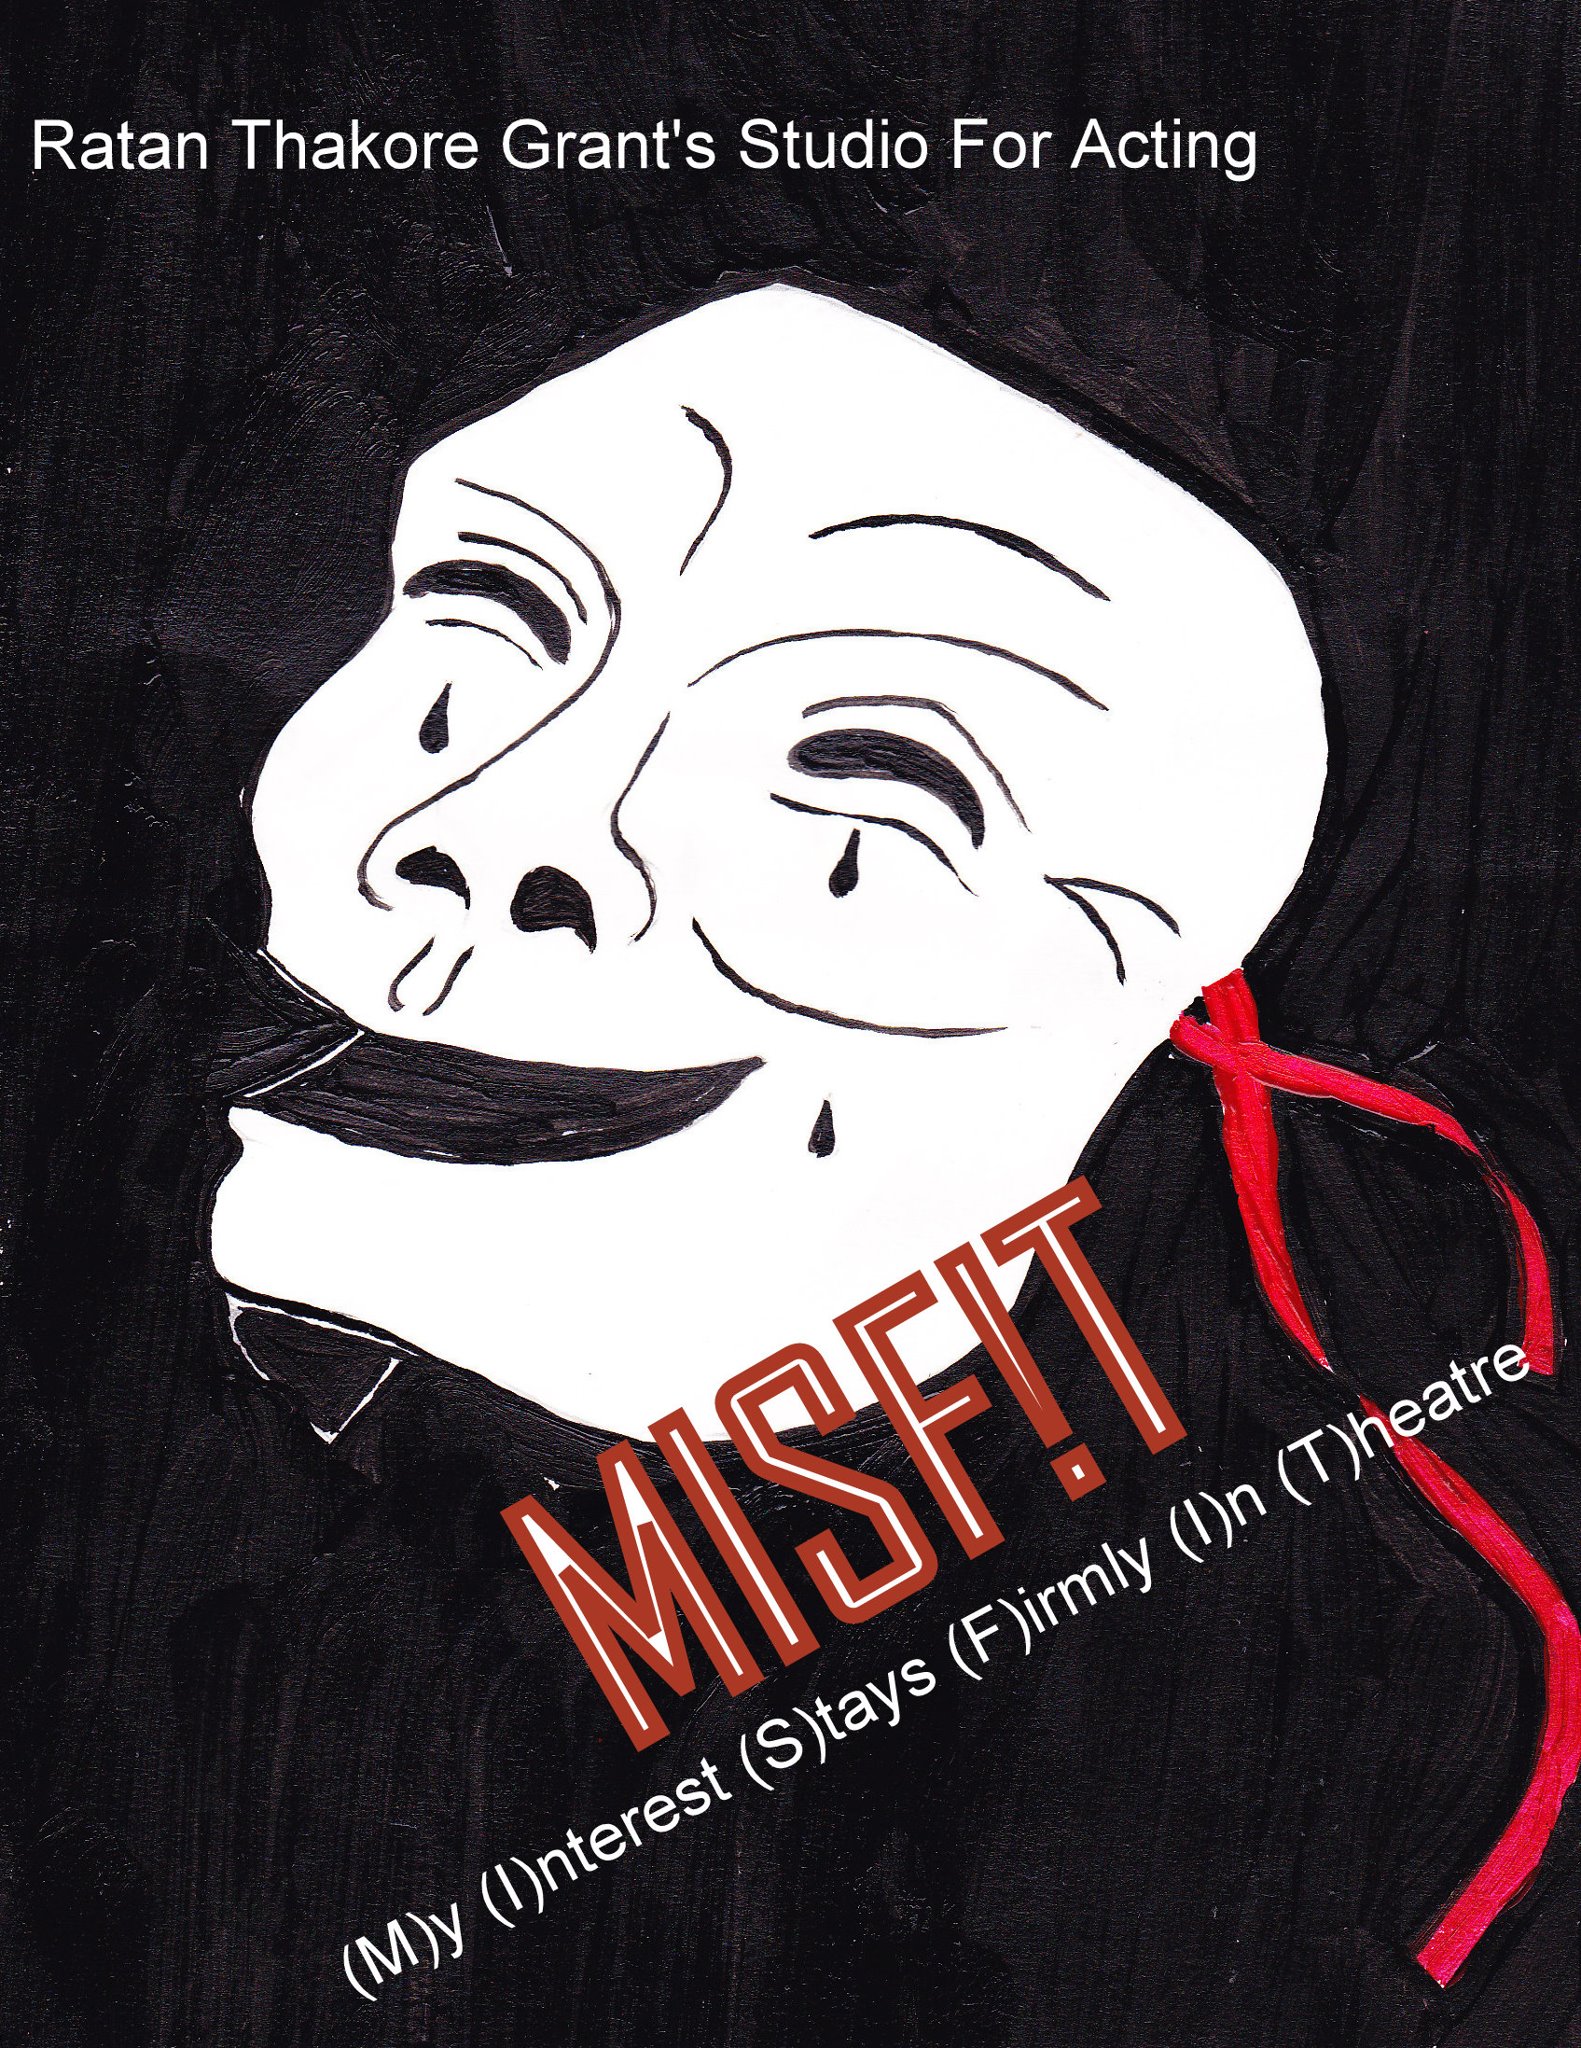 MISF!T's facebook page